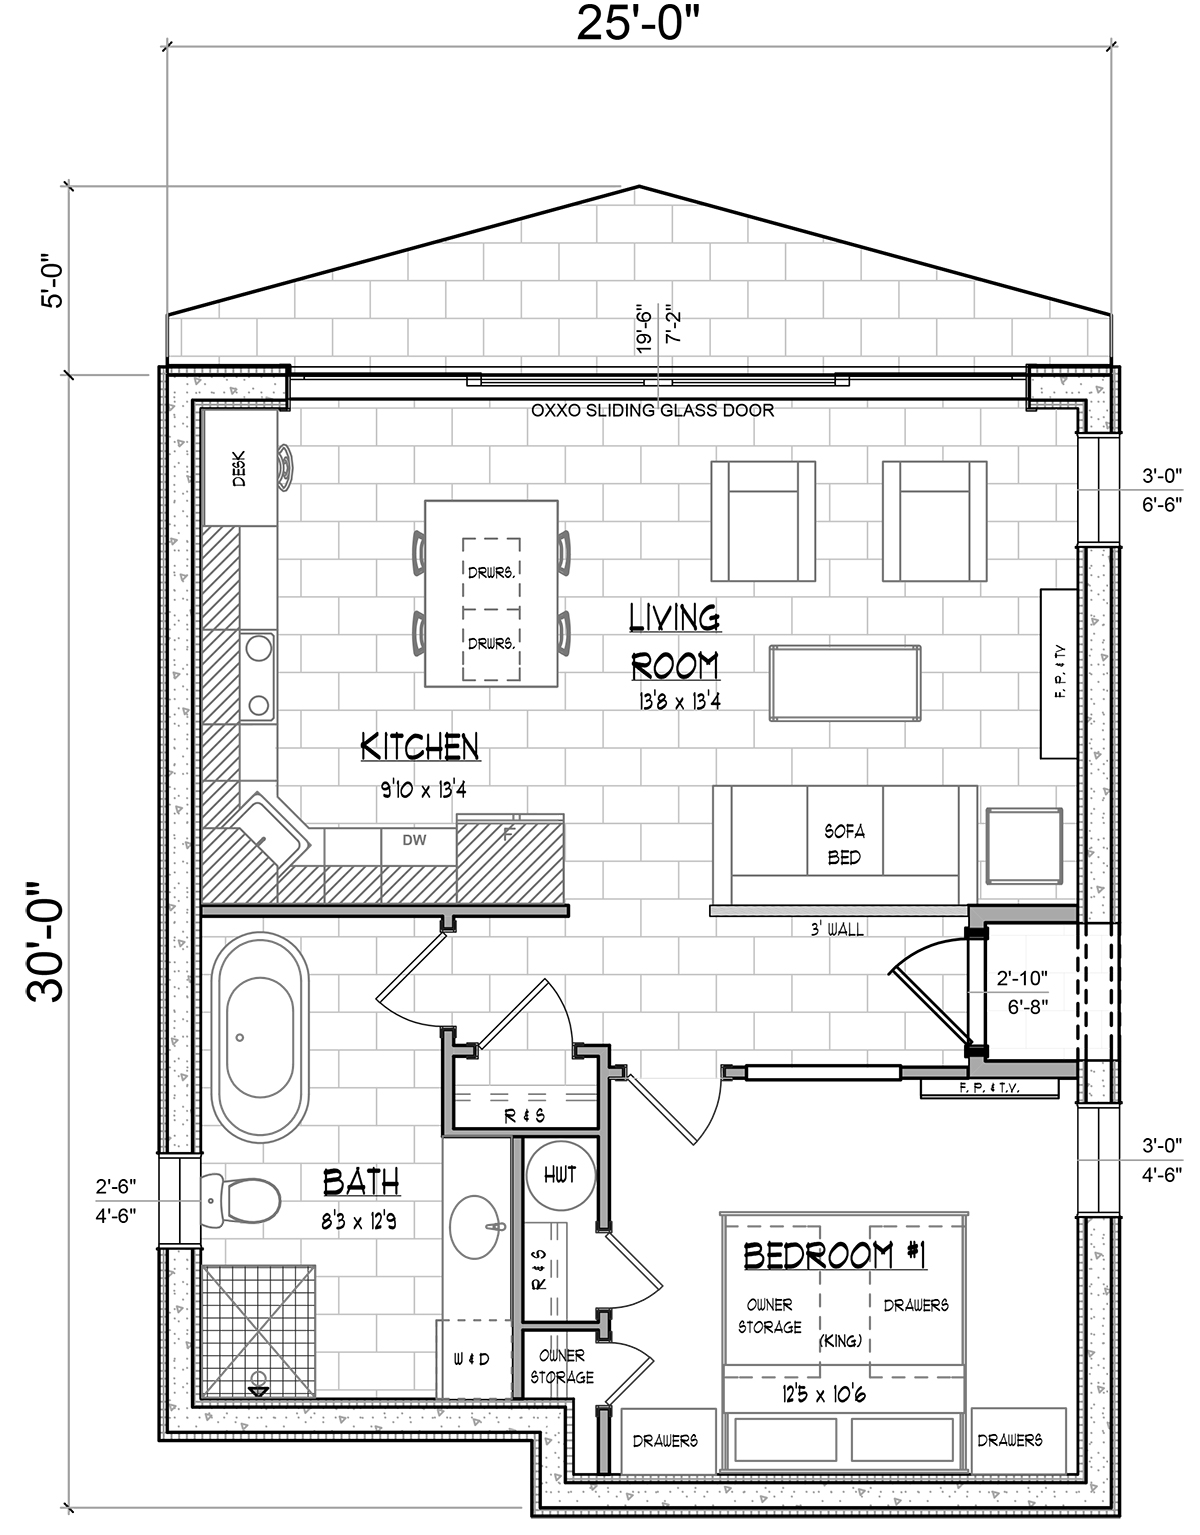 Suite room design in AutoCAD 2D drawing, CAD file, dwg file - Cadbull